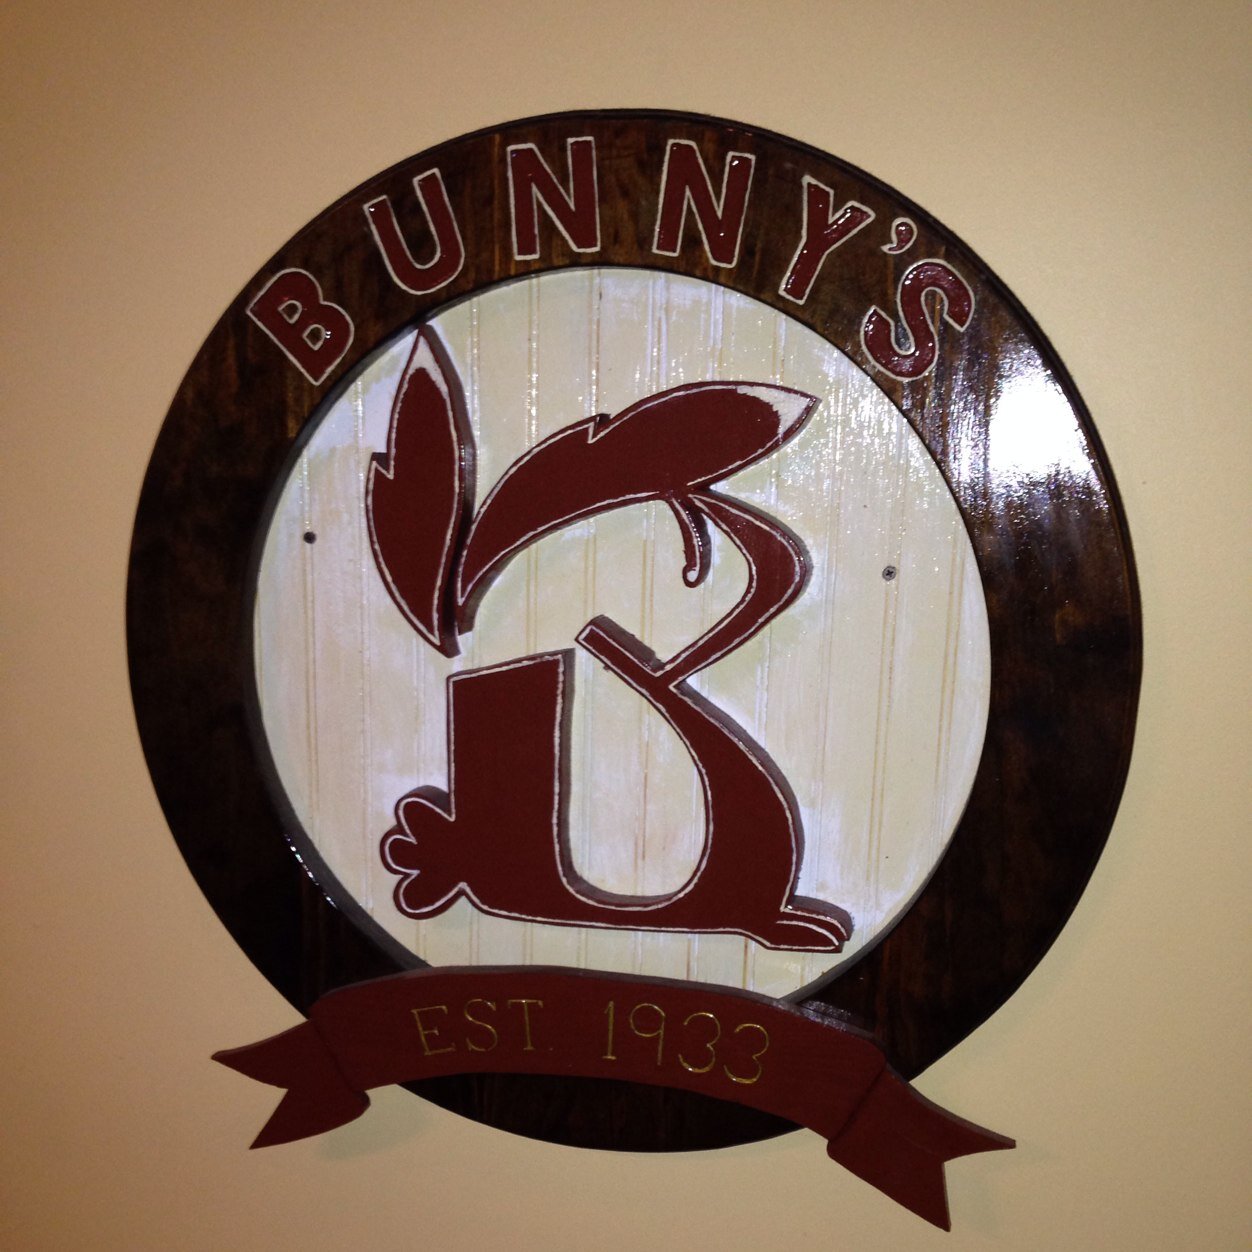 Proudly serving South Orange, NJ. for 5 generations-A home away from home-where everyone knows your name-Our family welcomes your family to Bunny's Sports Bar!